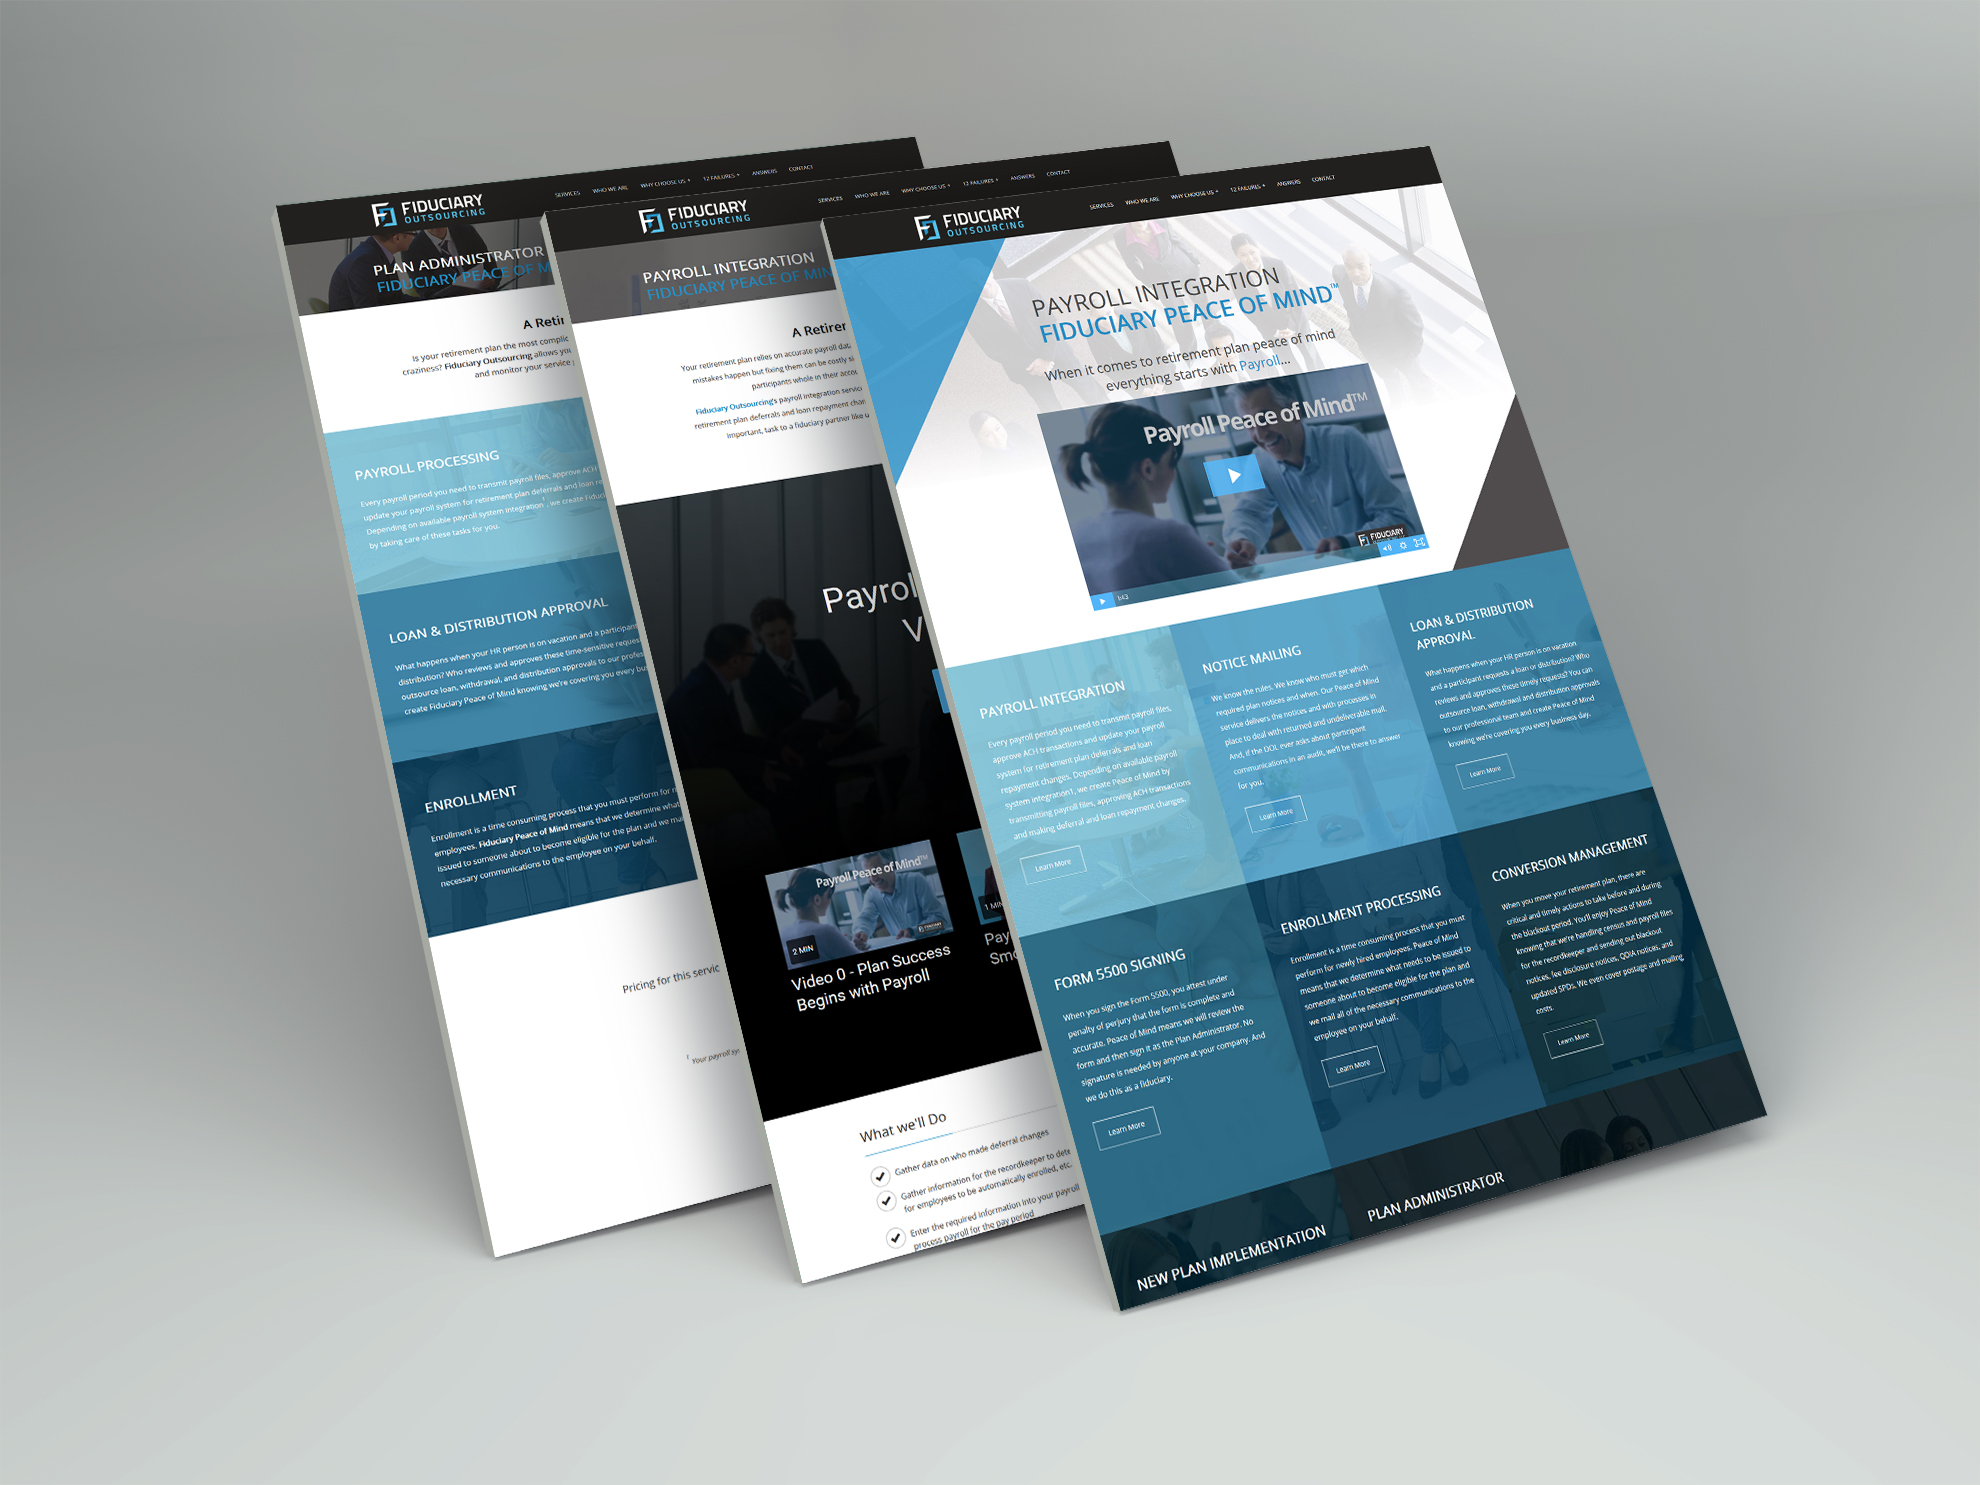 3 screen captures of the Fiduciary Outsourcing website design